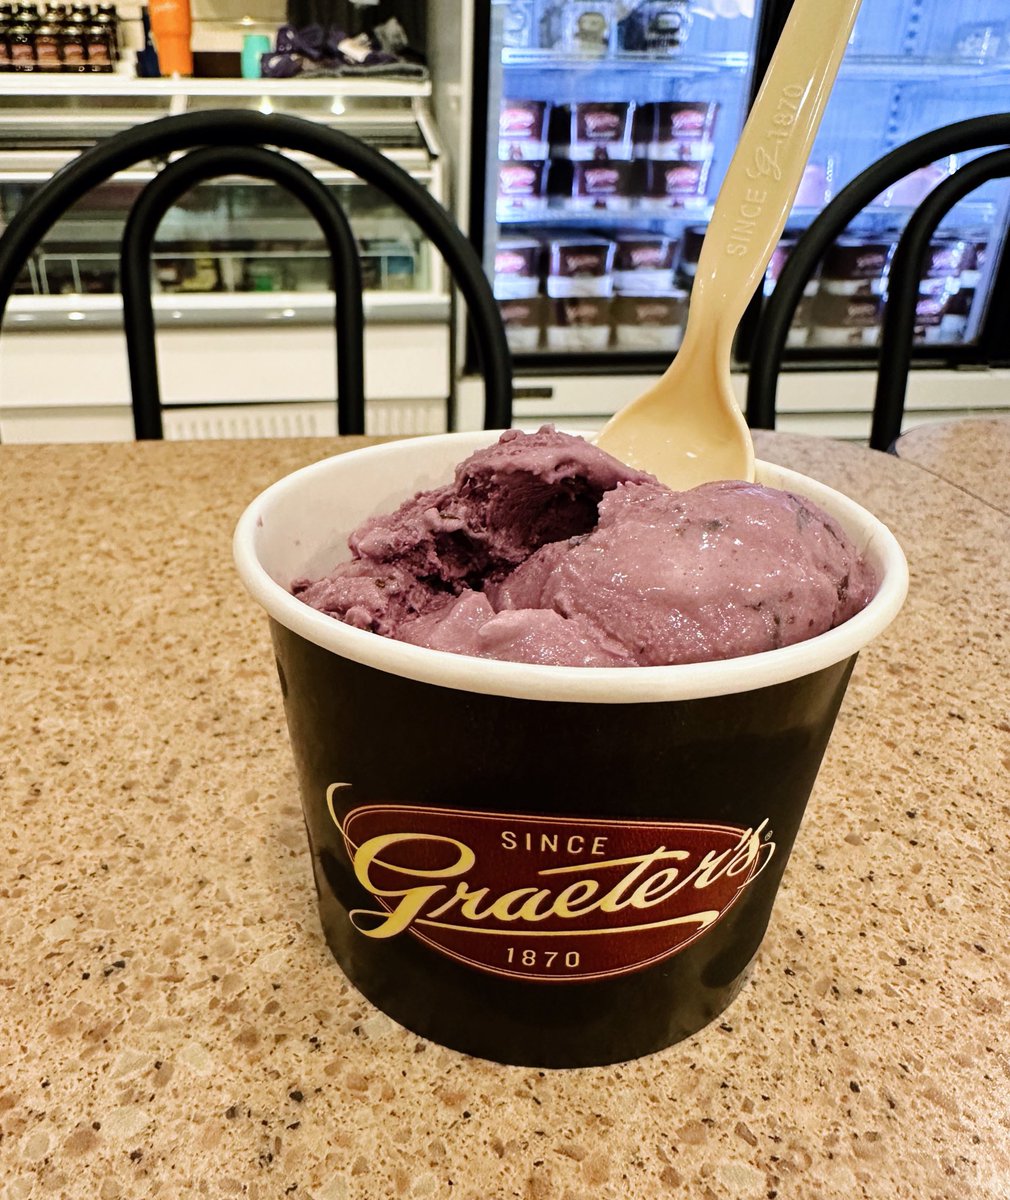 The last thing I wanted to do in Indy last night before heading back to the hotel and packing up in the morning was try Graeter’s for the first time ever. I had Black Raspberry Chip and S’mores and they were AMAZING. 😋